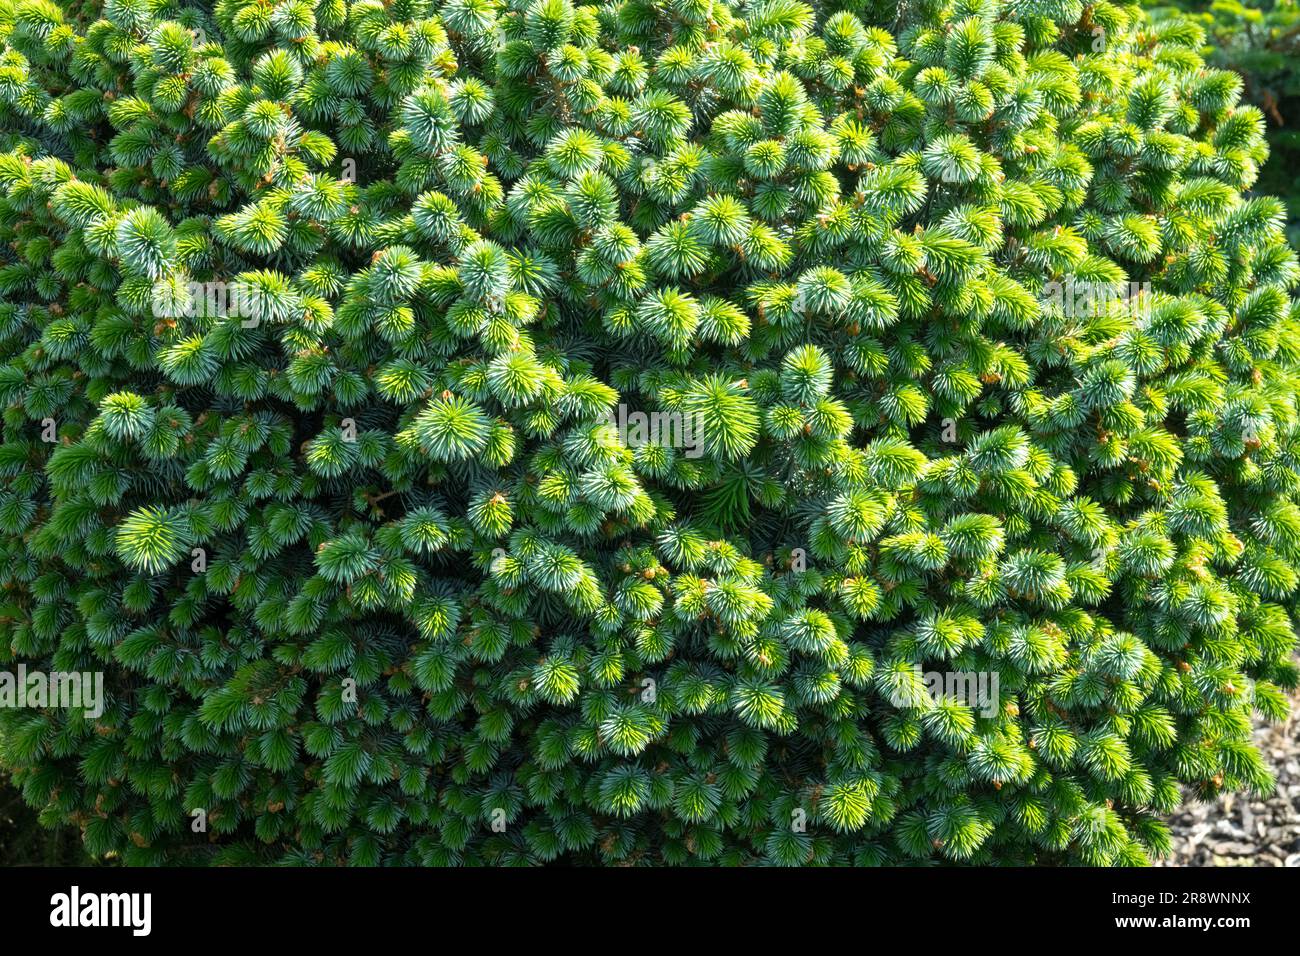 Dense, Needles, Low, Tree, Small, Spruce, Sitka Spruce, Picea sitchensis 'Tenas' Stock Photo